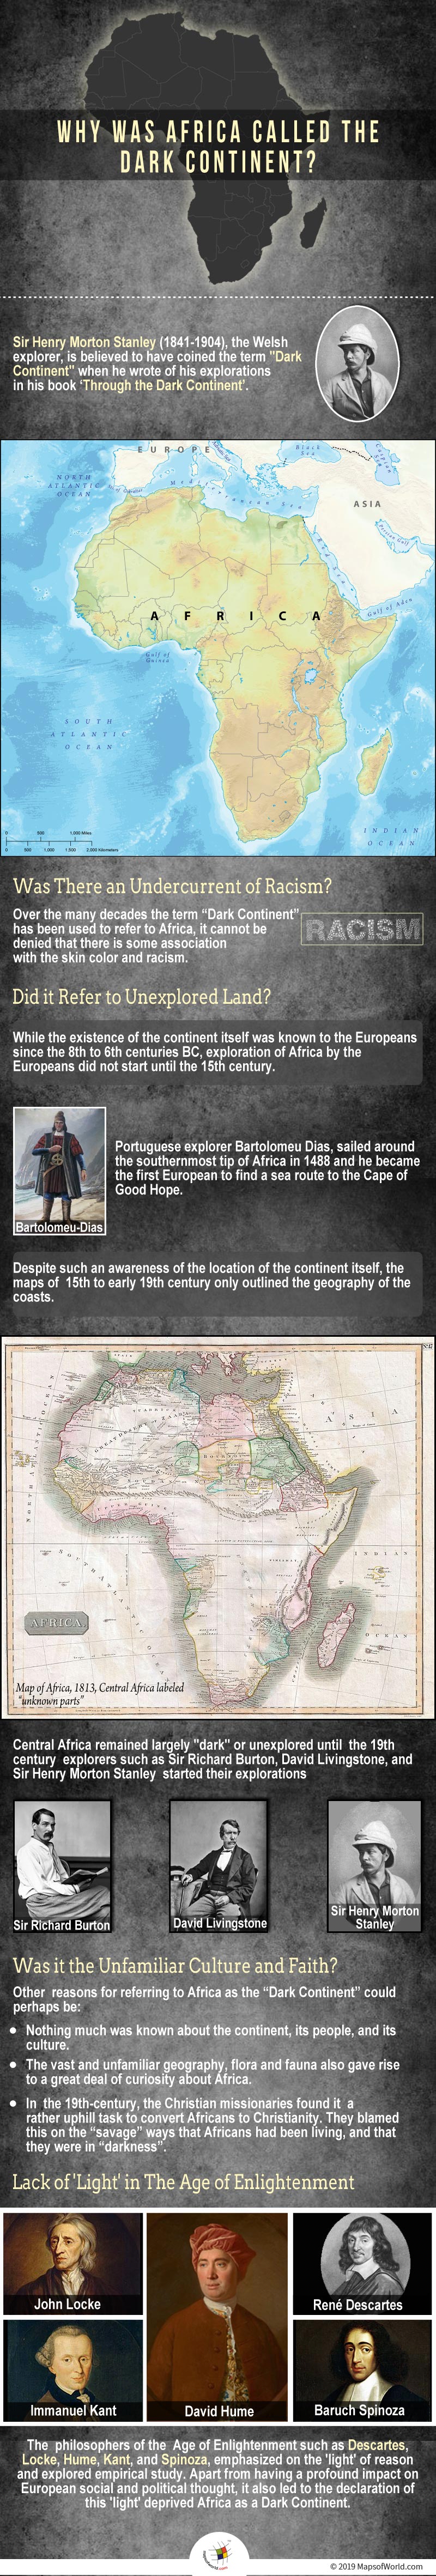 Infographic Giving Details on Why Africa was Called the Dark Continent